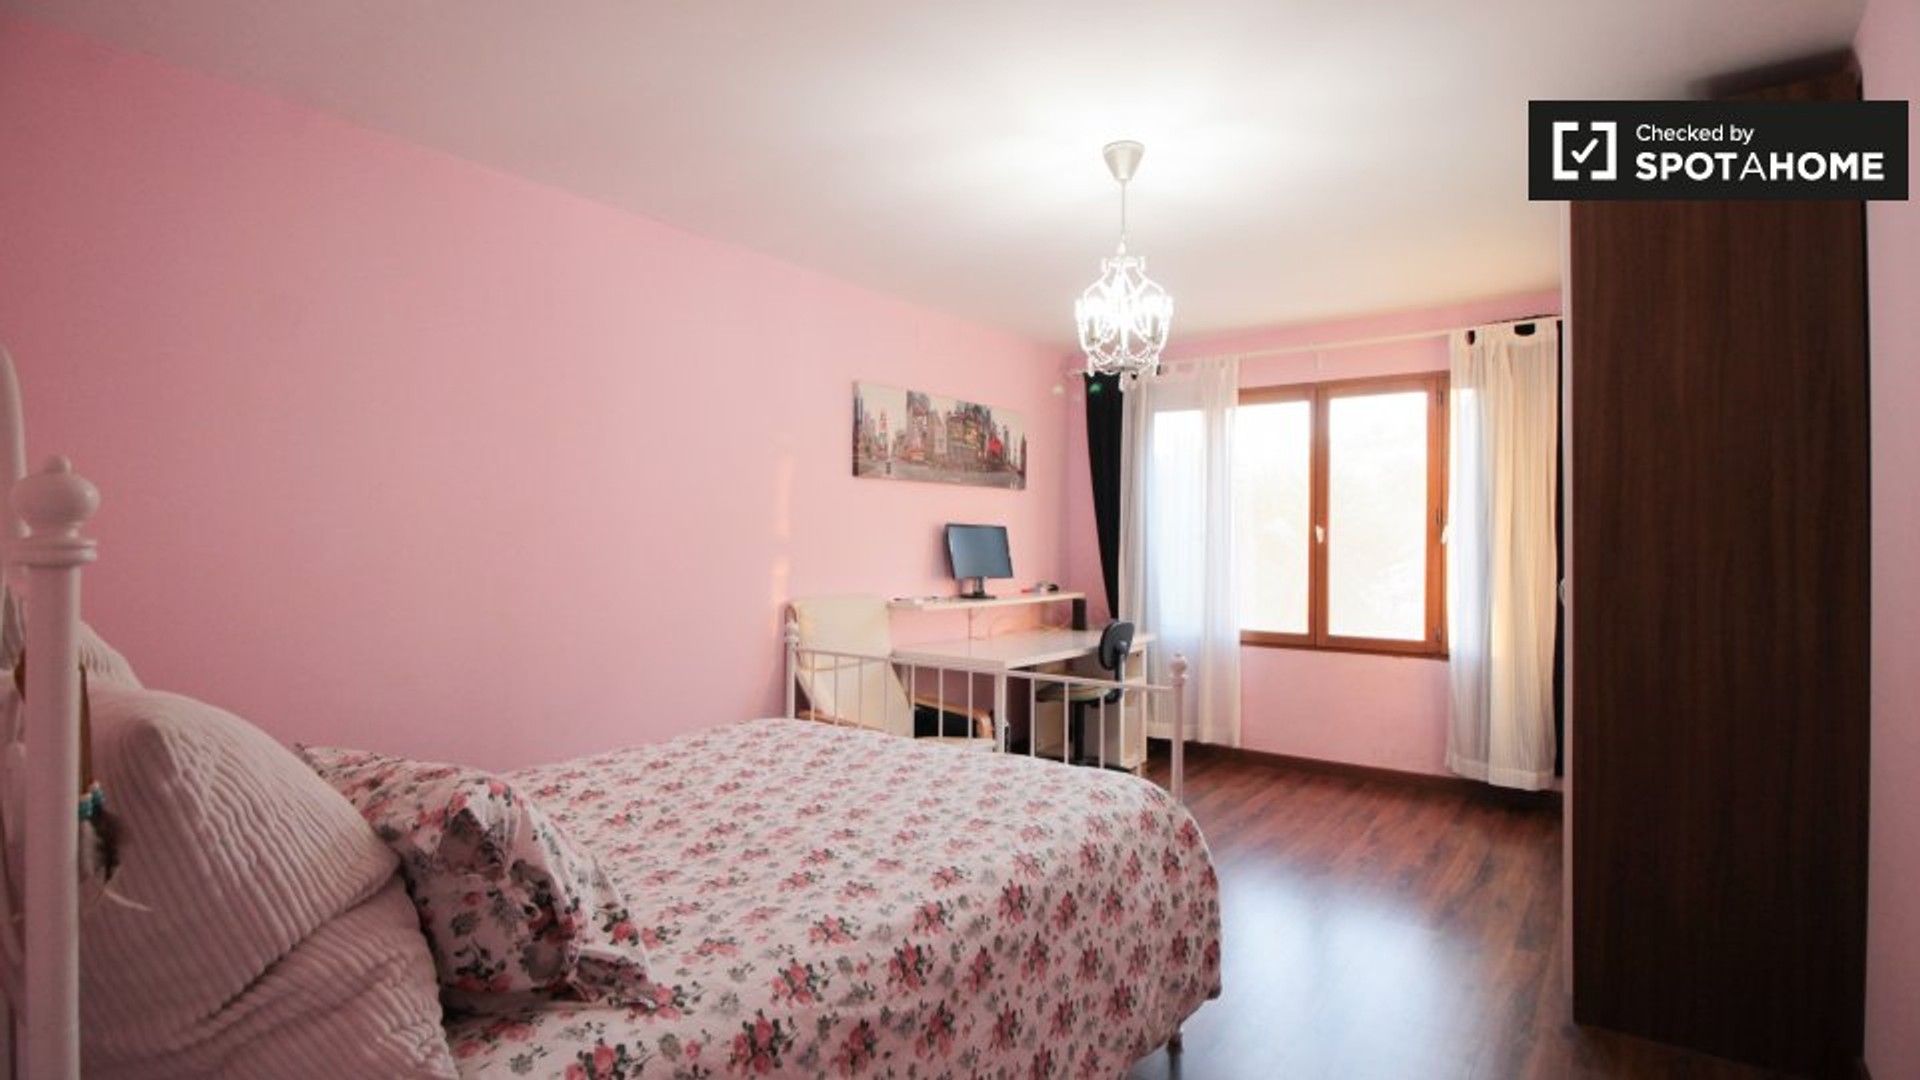 Room for rent in a shared flat in Sant Cugat Del Vallès